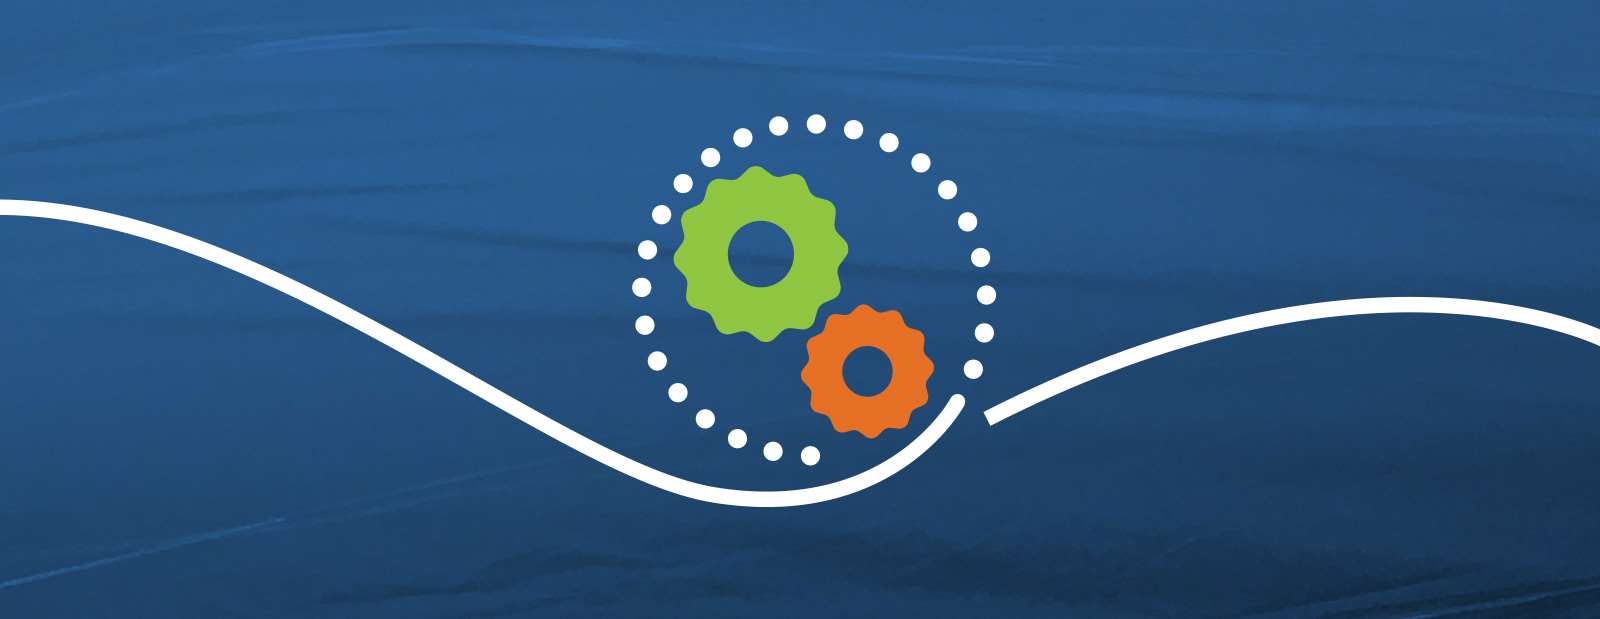 Graphic illustration of a circle with two cogs aligned with a blue background